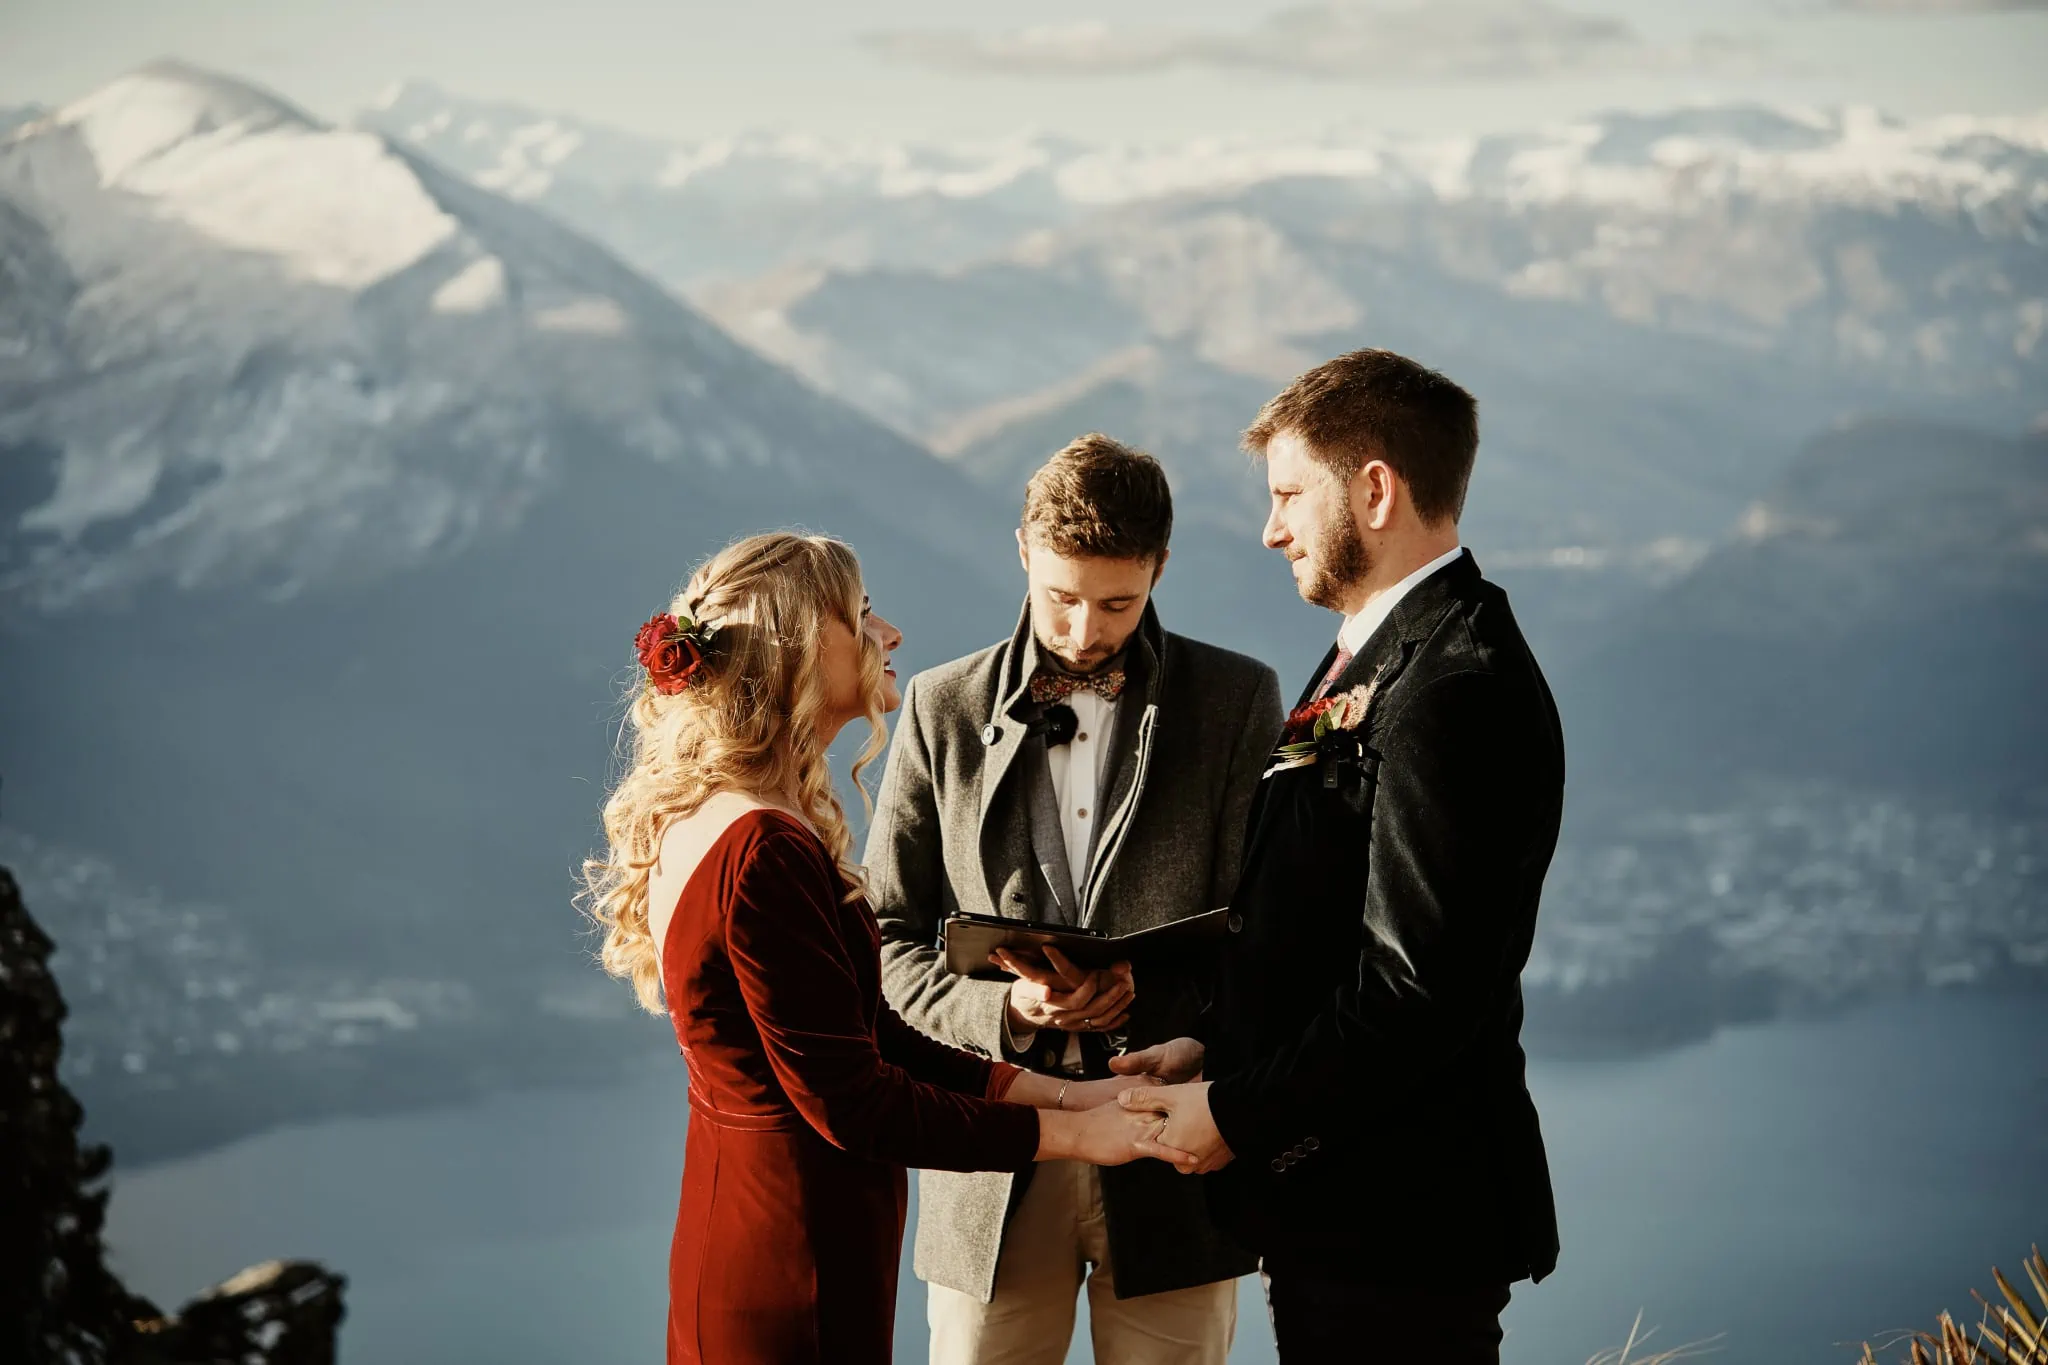 Claire and Rob exchange vows on top of Cecil Peak in Queenstown, New Zealand for their heli elopement wedding.